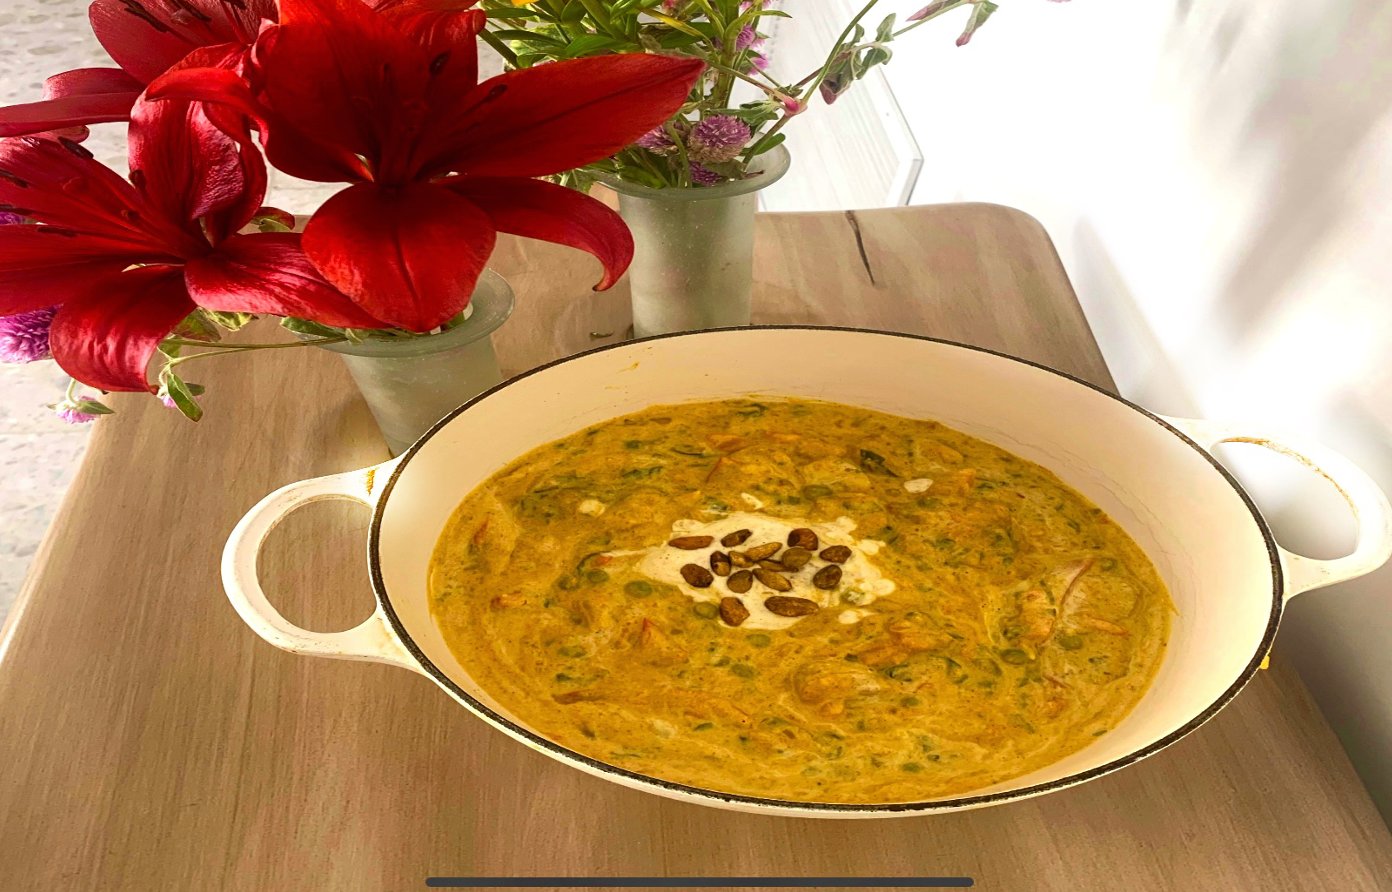 Korma, a mild, nutty, sweet, scented Indian sauce, is the perfect accompaniment to fingerling potatoes. It can be served alongside grilled or baked cod or lamb chops, or with pre-cooked chicken or salmon added directly to the sauce.